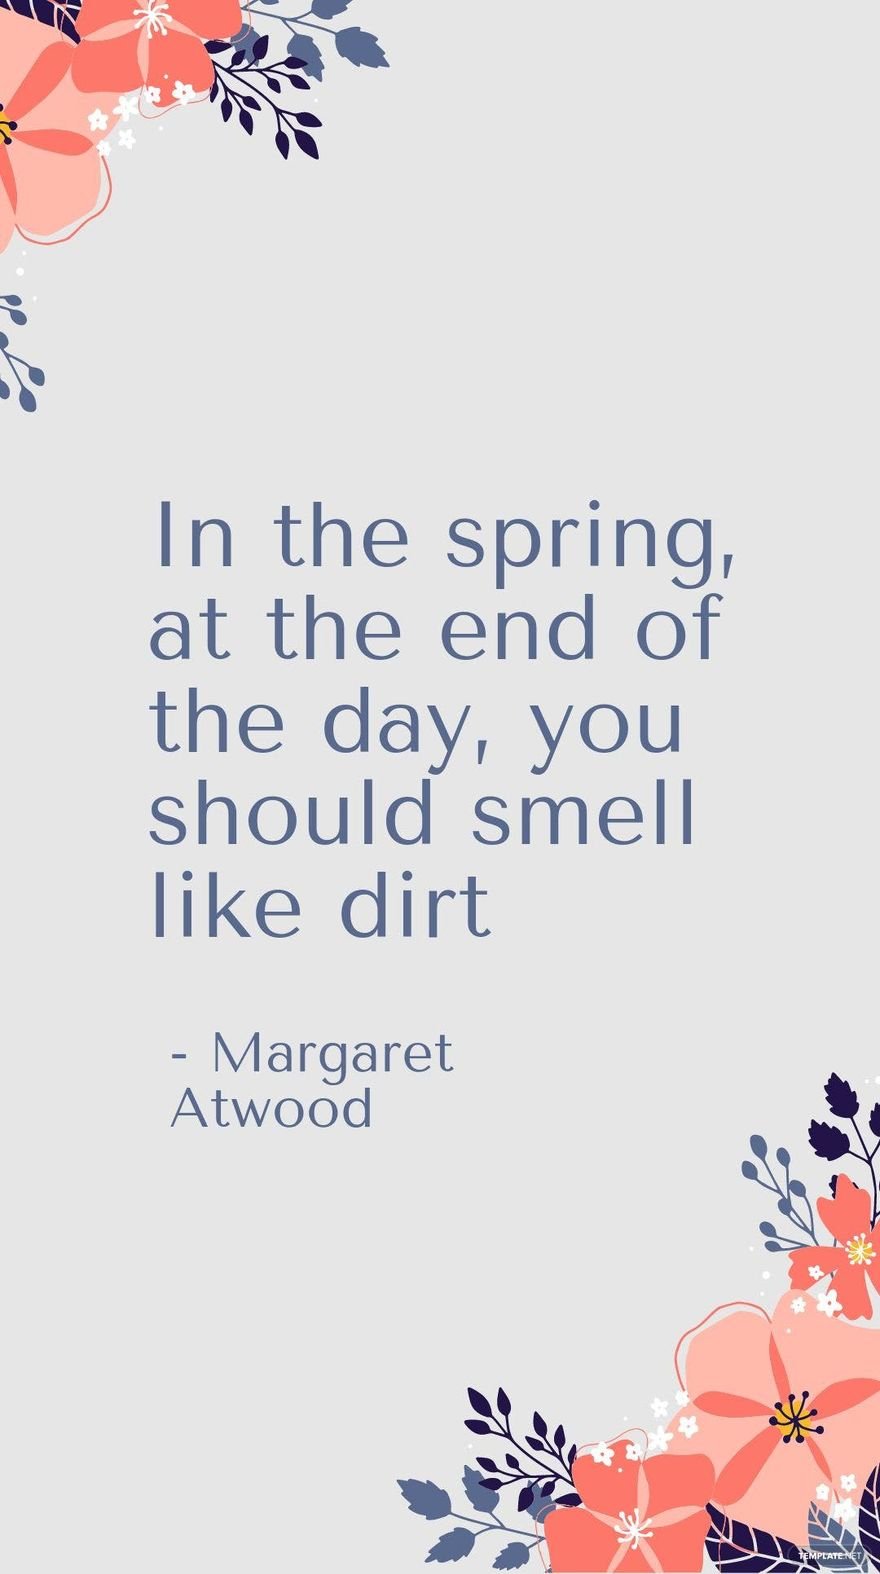 Margaret Atwood - In the spring, at the end of the day, you should smell like dirt